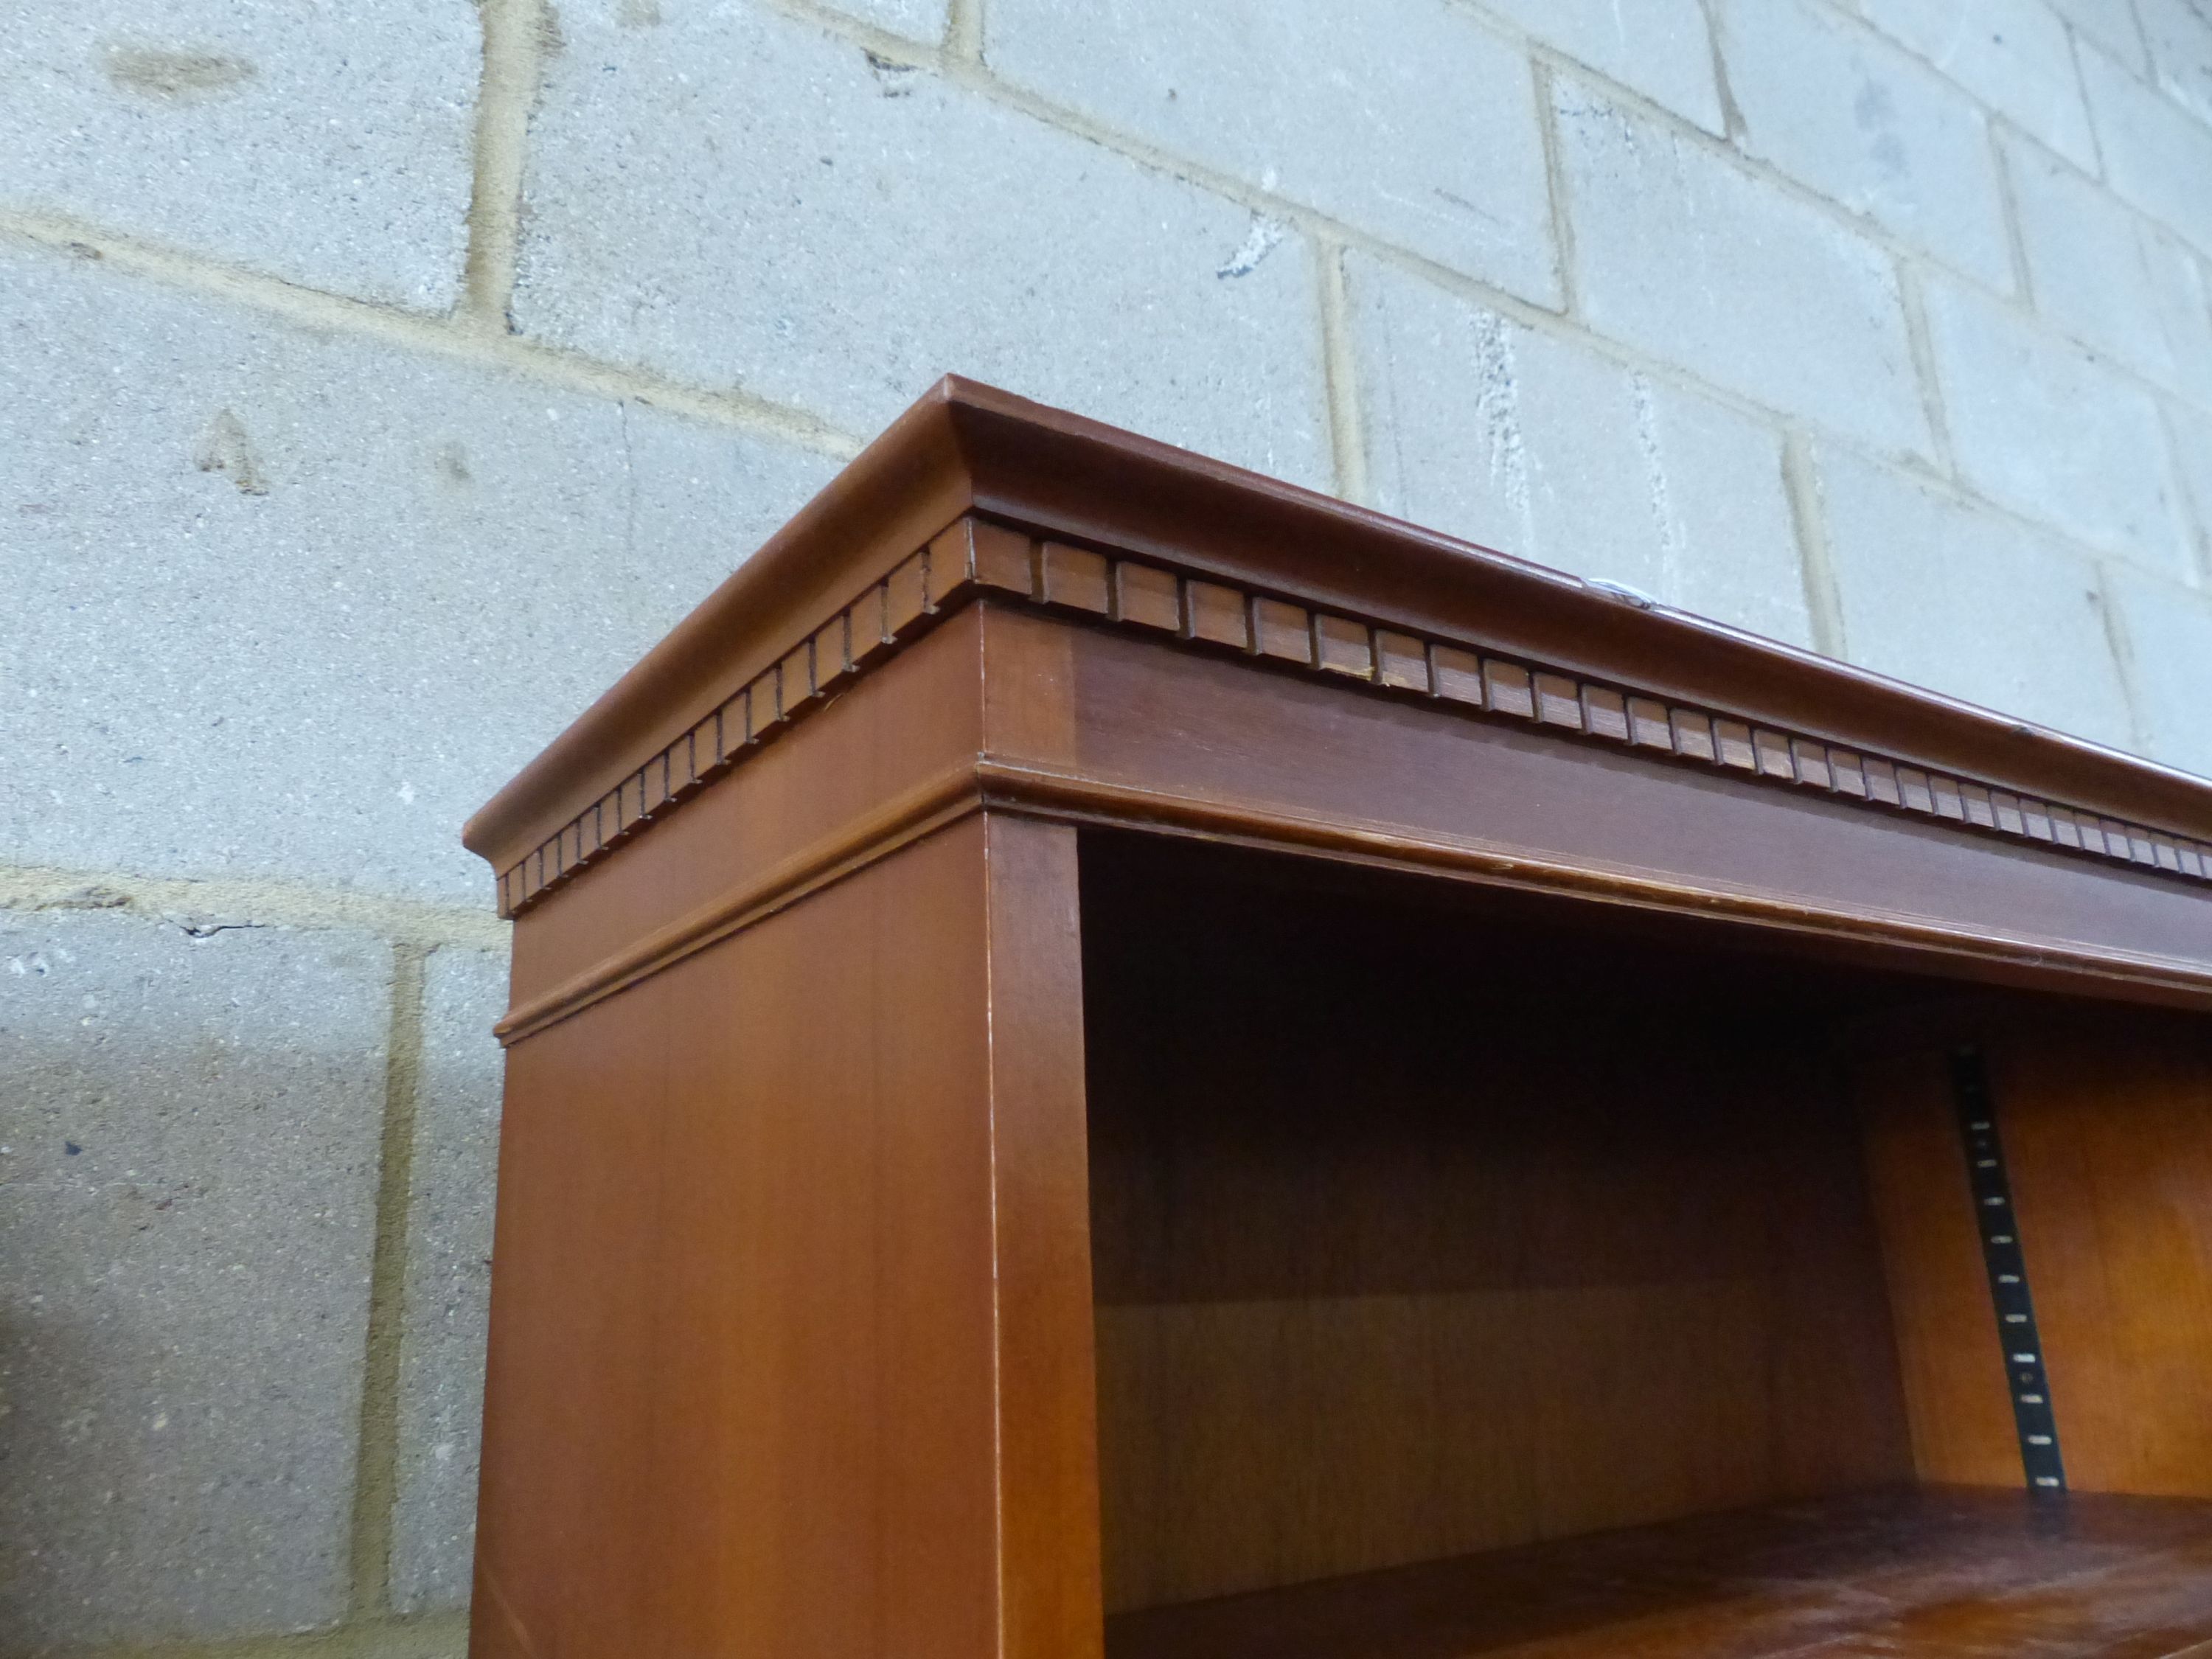 A reproduction mahogany open bookcase, width 152cm depth 30cm height 184cm